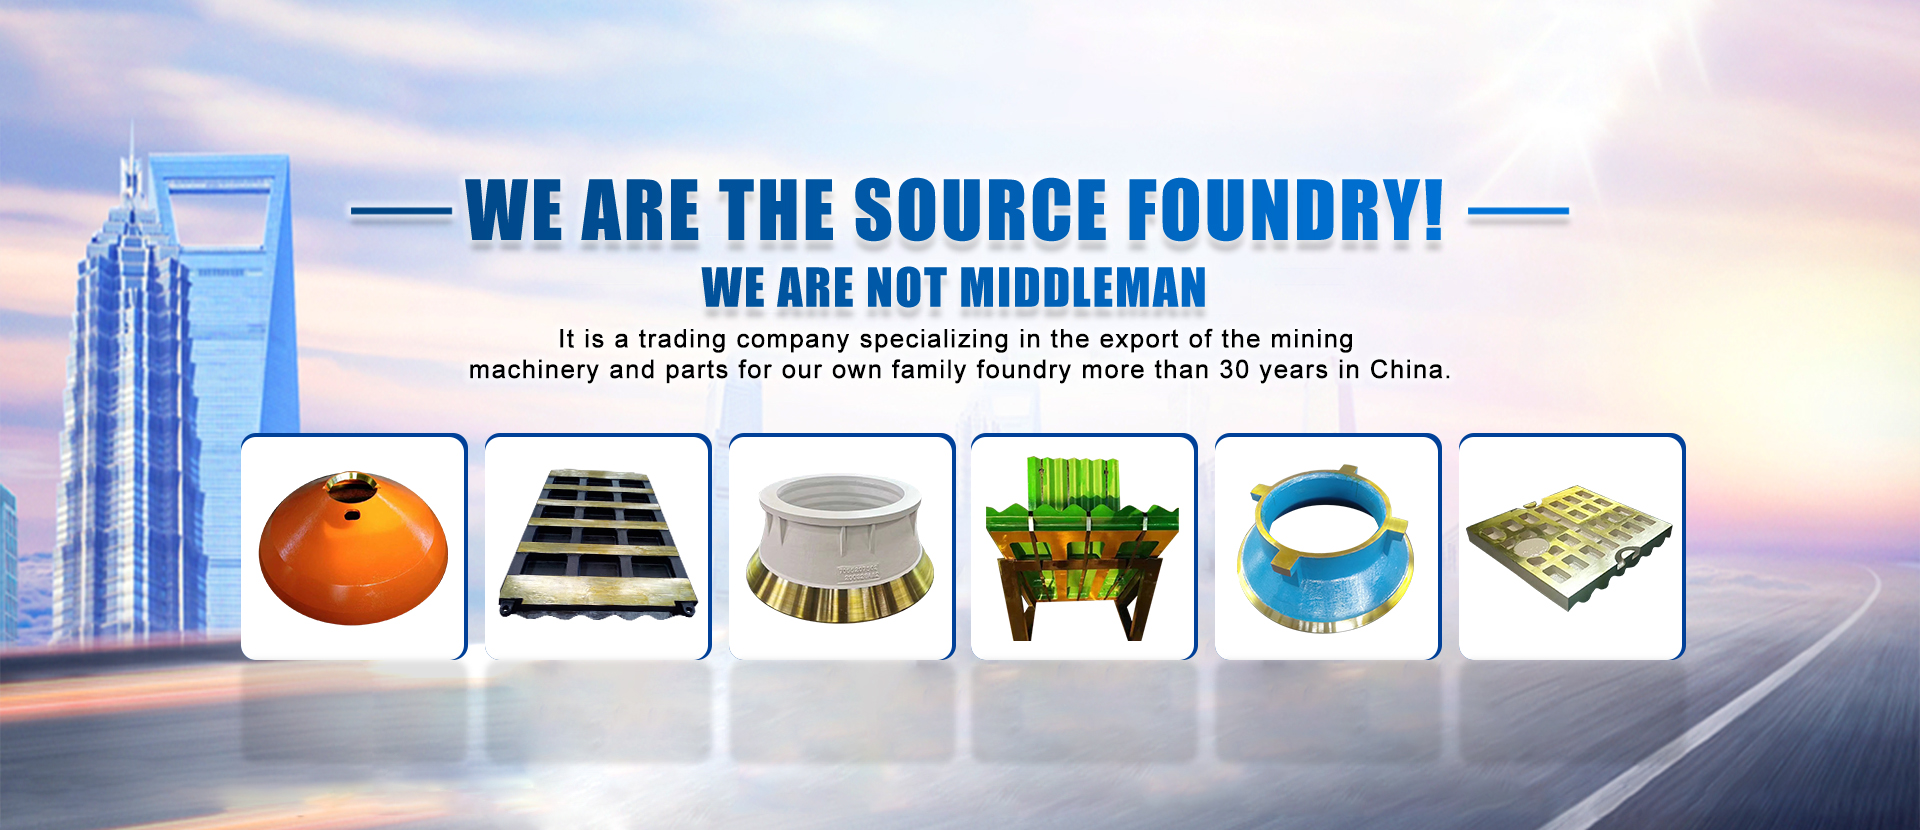 Ming Feng Machinery About Us